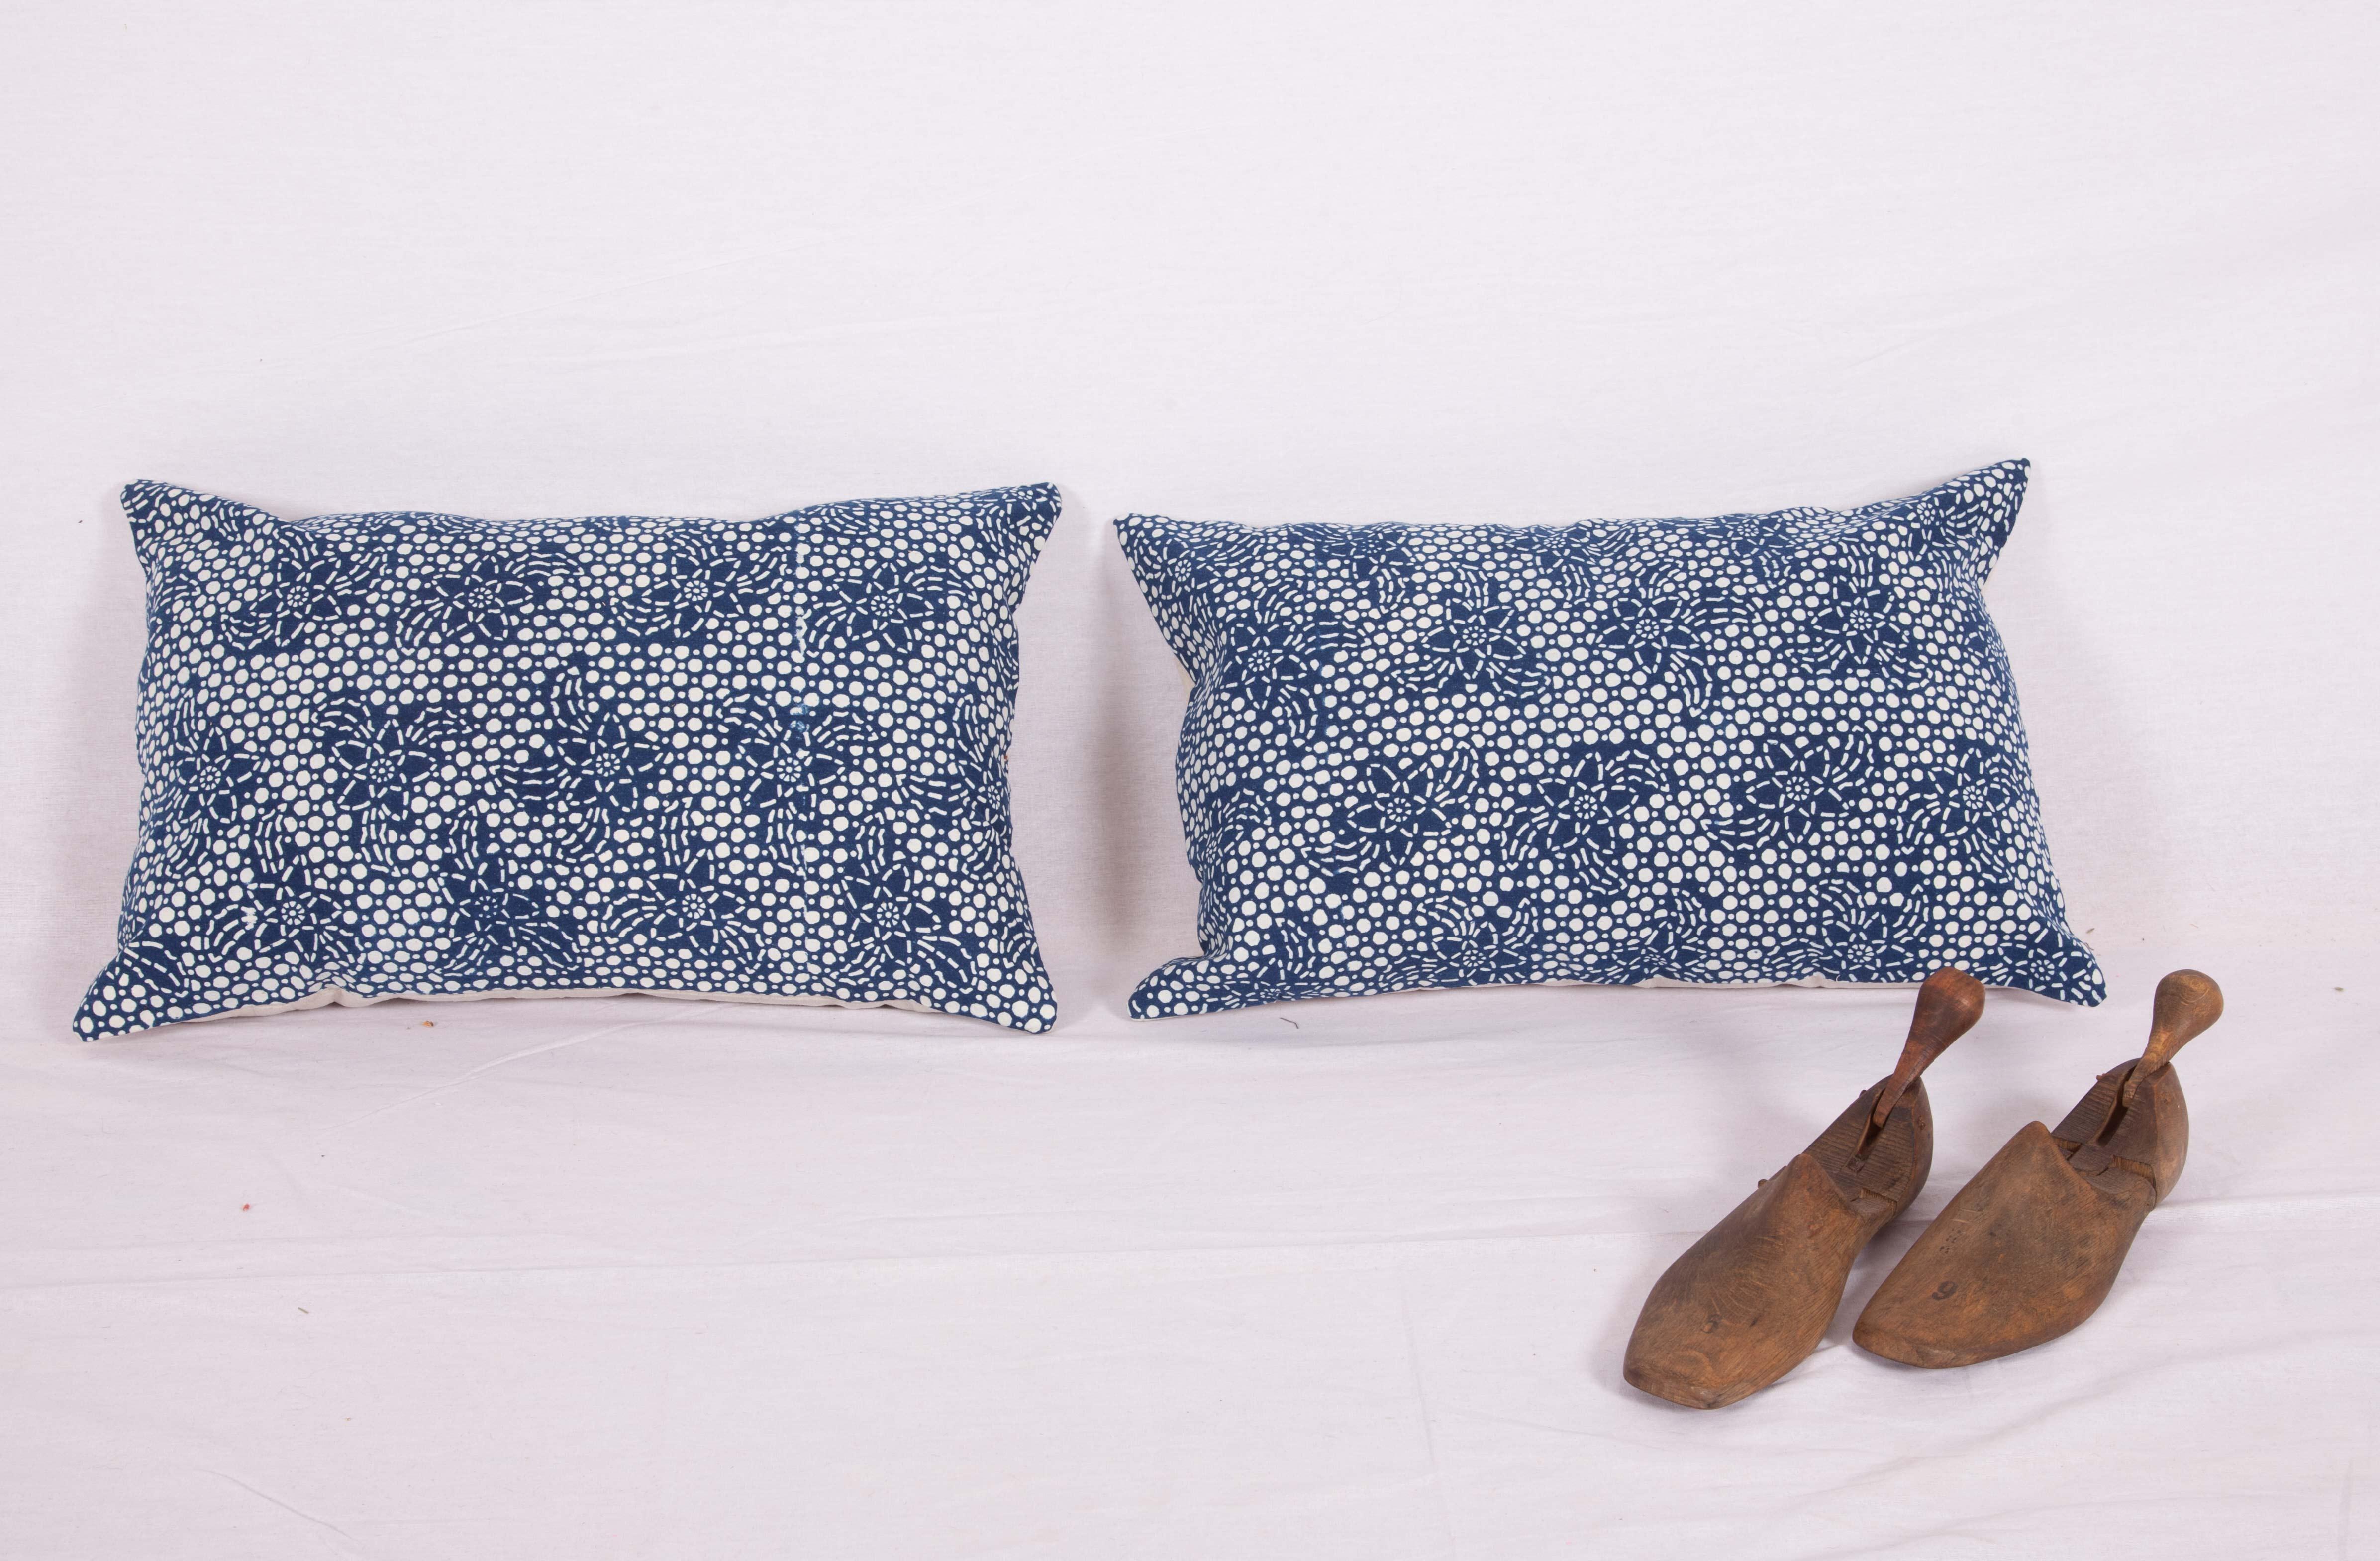 Tribal Contemporary Pillow Cases Made from a Resist Dyed Indigo Miao Fabric